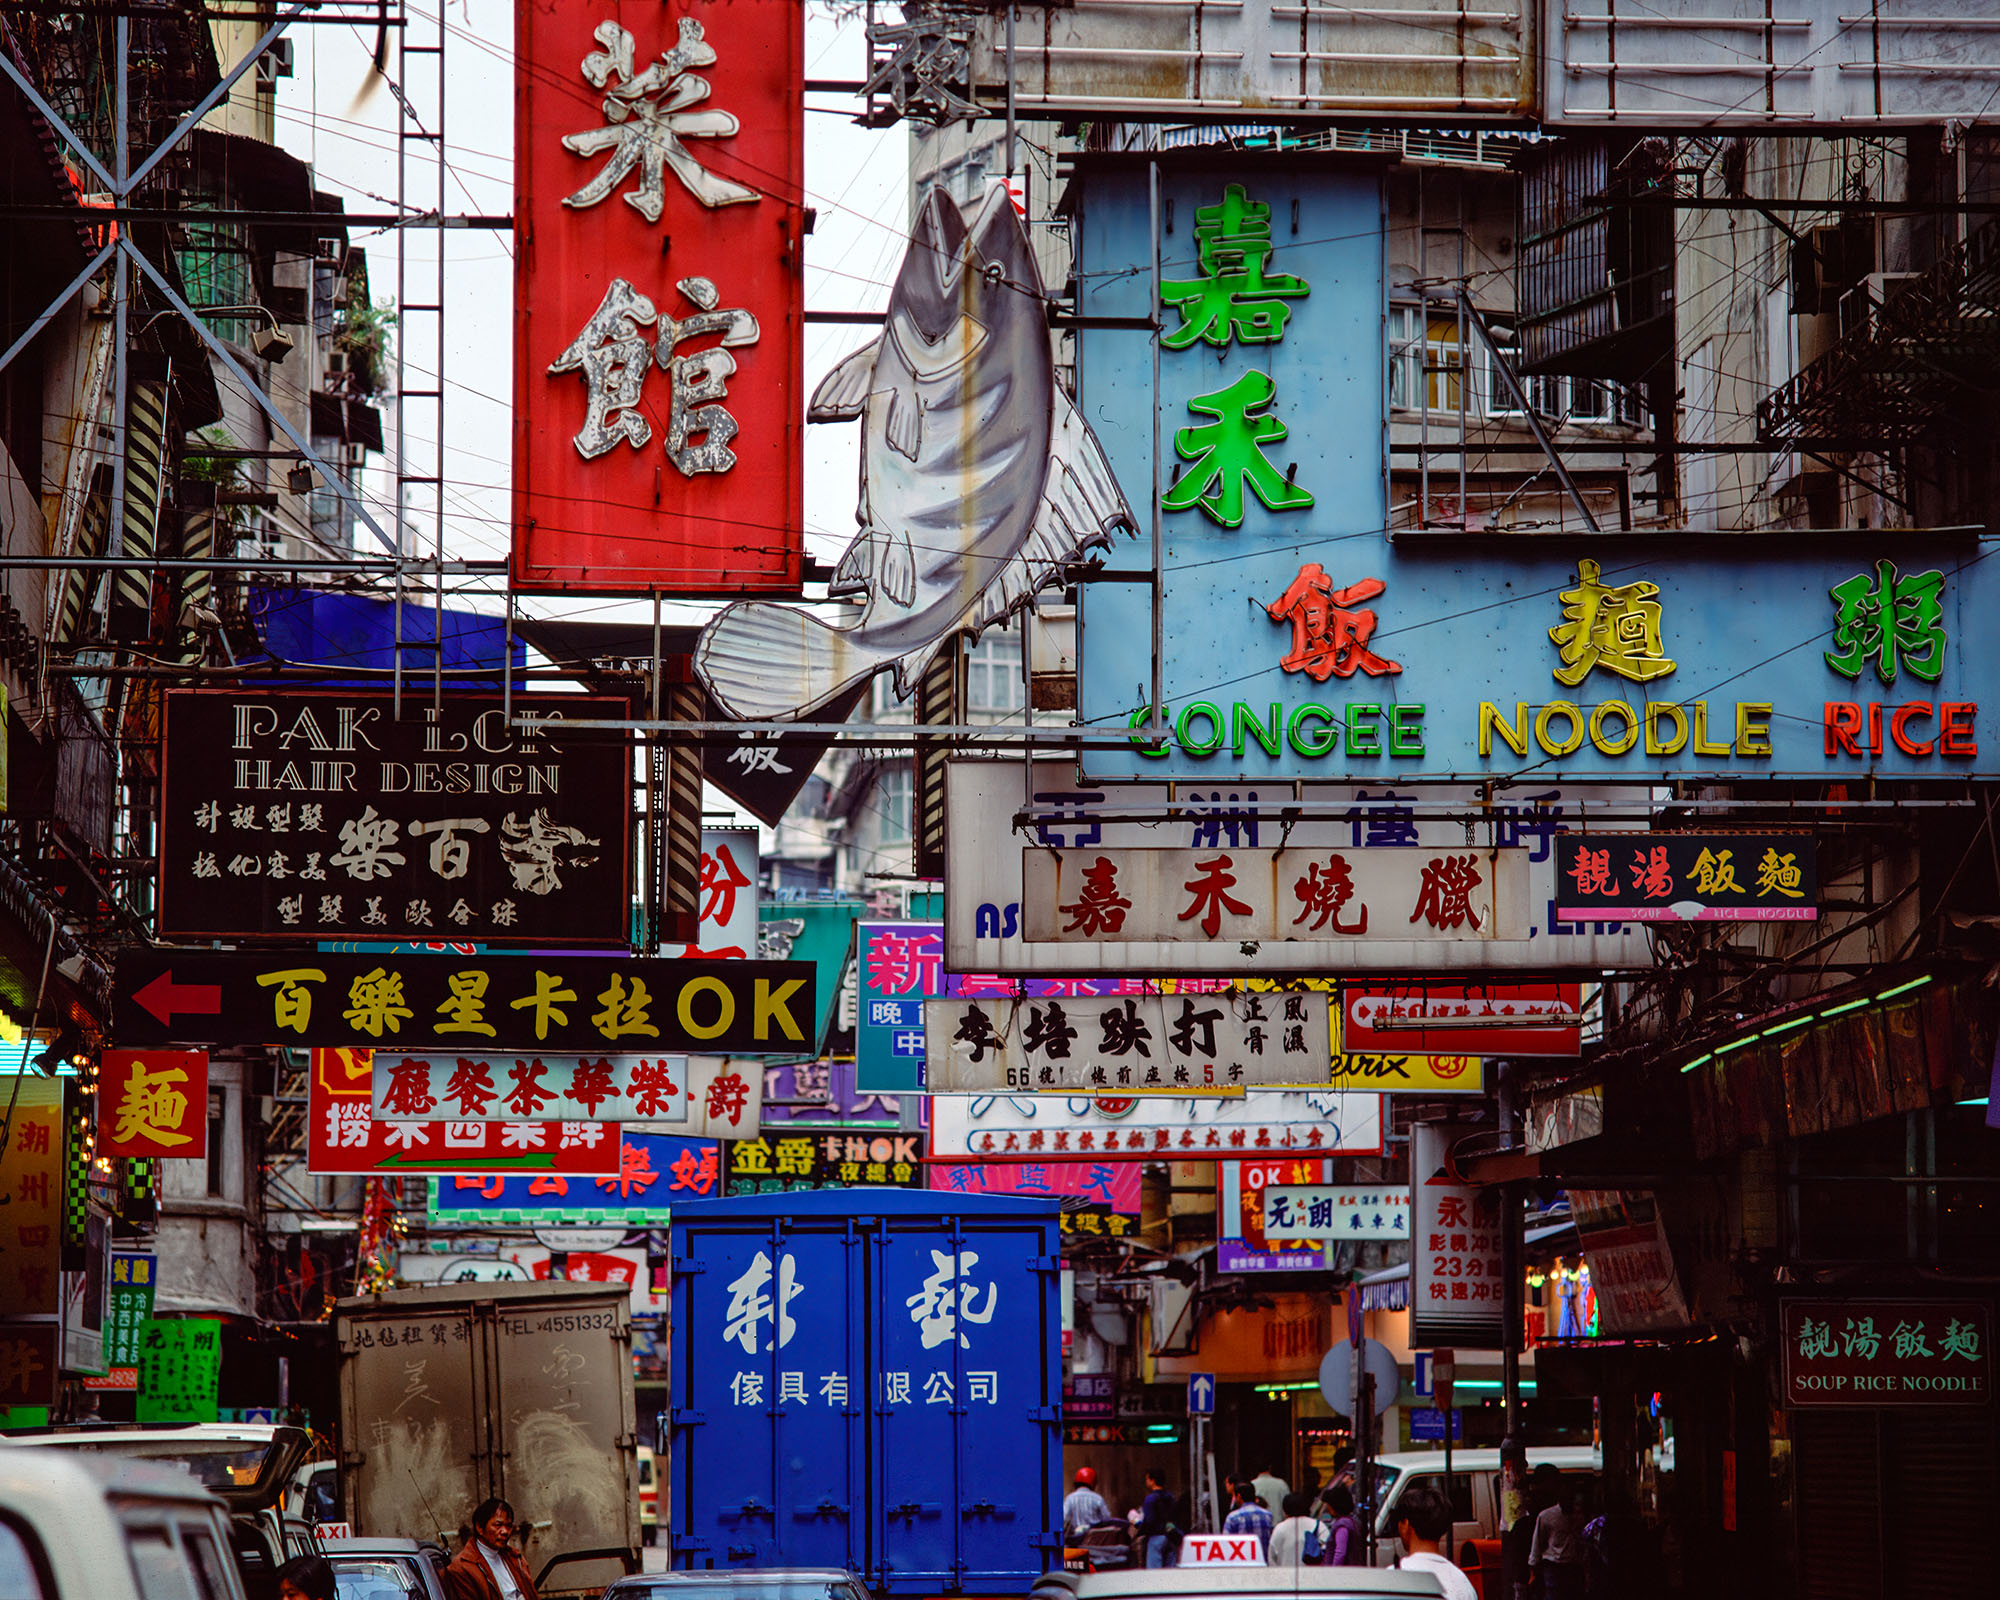 Captured with my Bronica ETRSi camera, this image showcases a vibrant tapestry of colorful signs adorning the buildings in bustling...